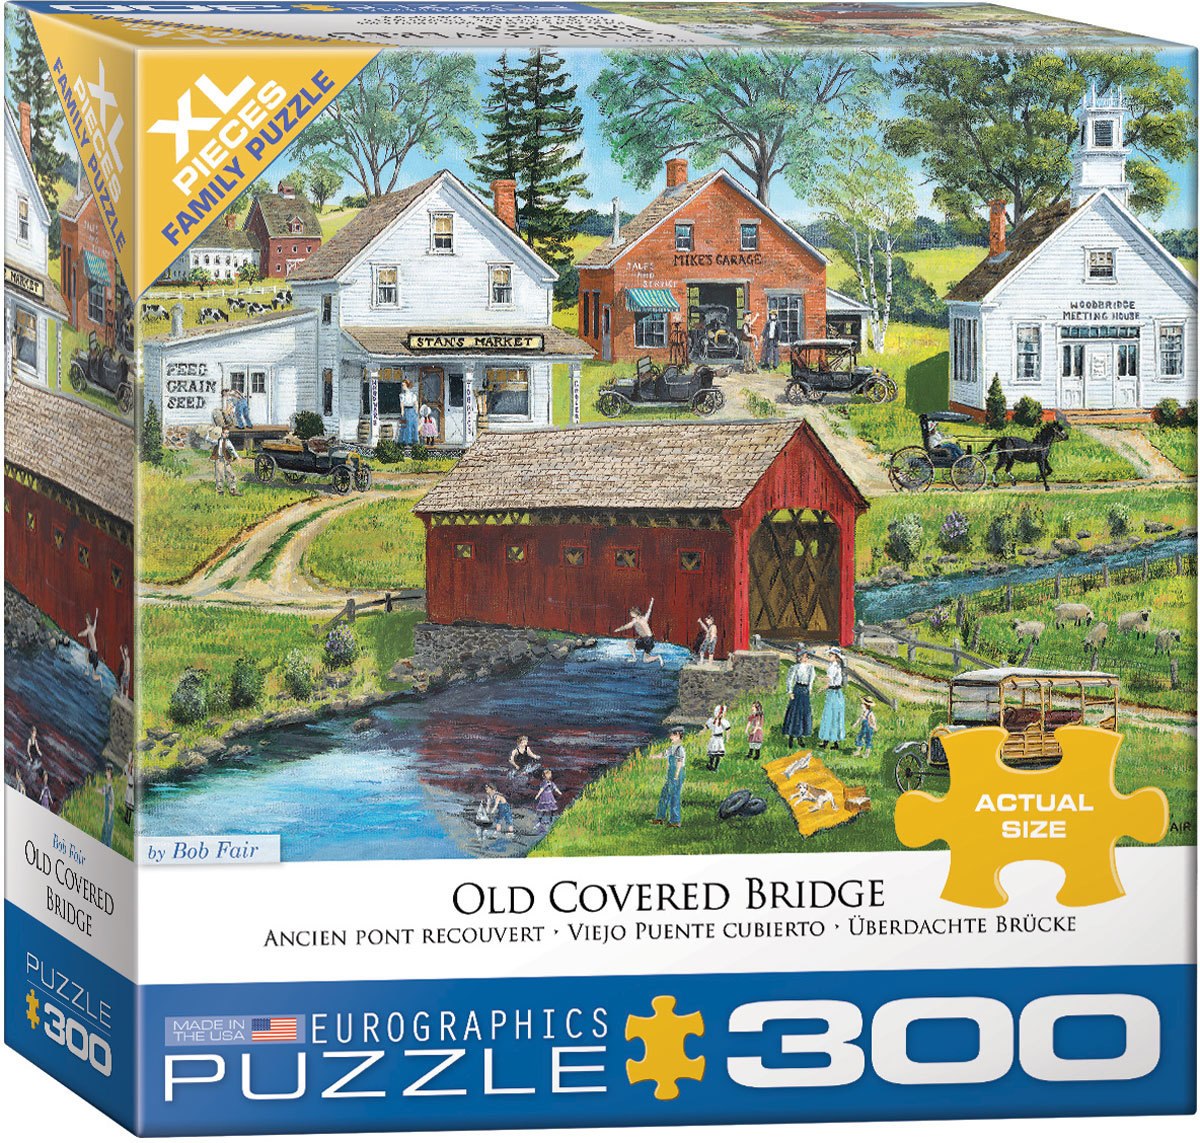 Fair: Old Covered Bridge - 300pc Jigsaw Puzzle by Eurographics  			  					NEW - image 1